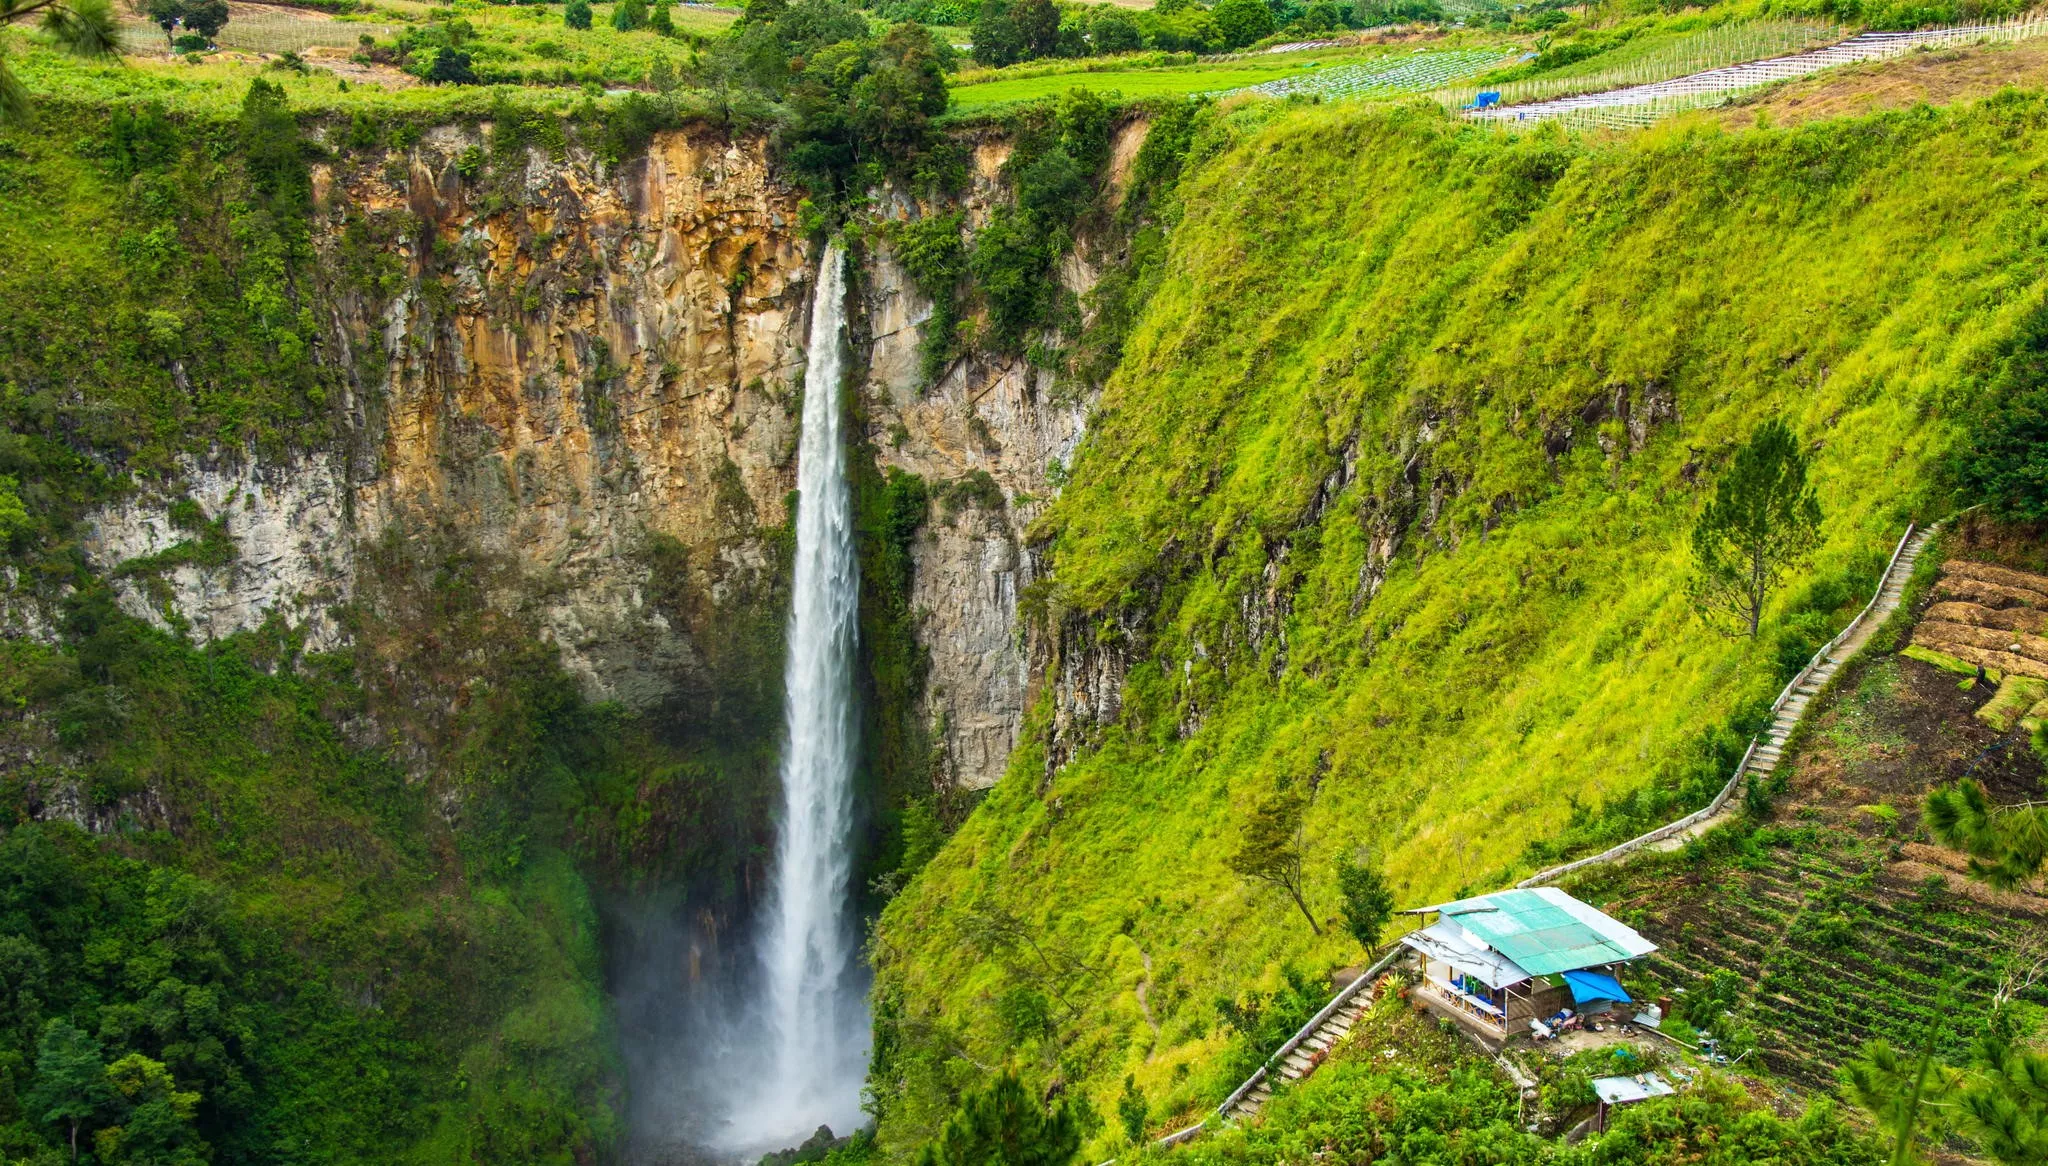 Sipiso-Piso Waterfall in Indonesia, Central Asia | Waterfalls,Trekking & Hiking - Rated 3.7